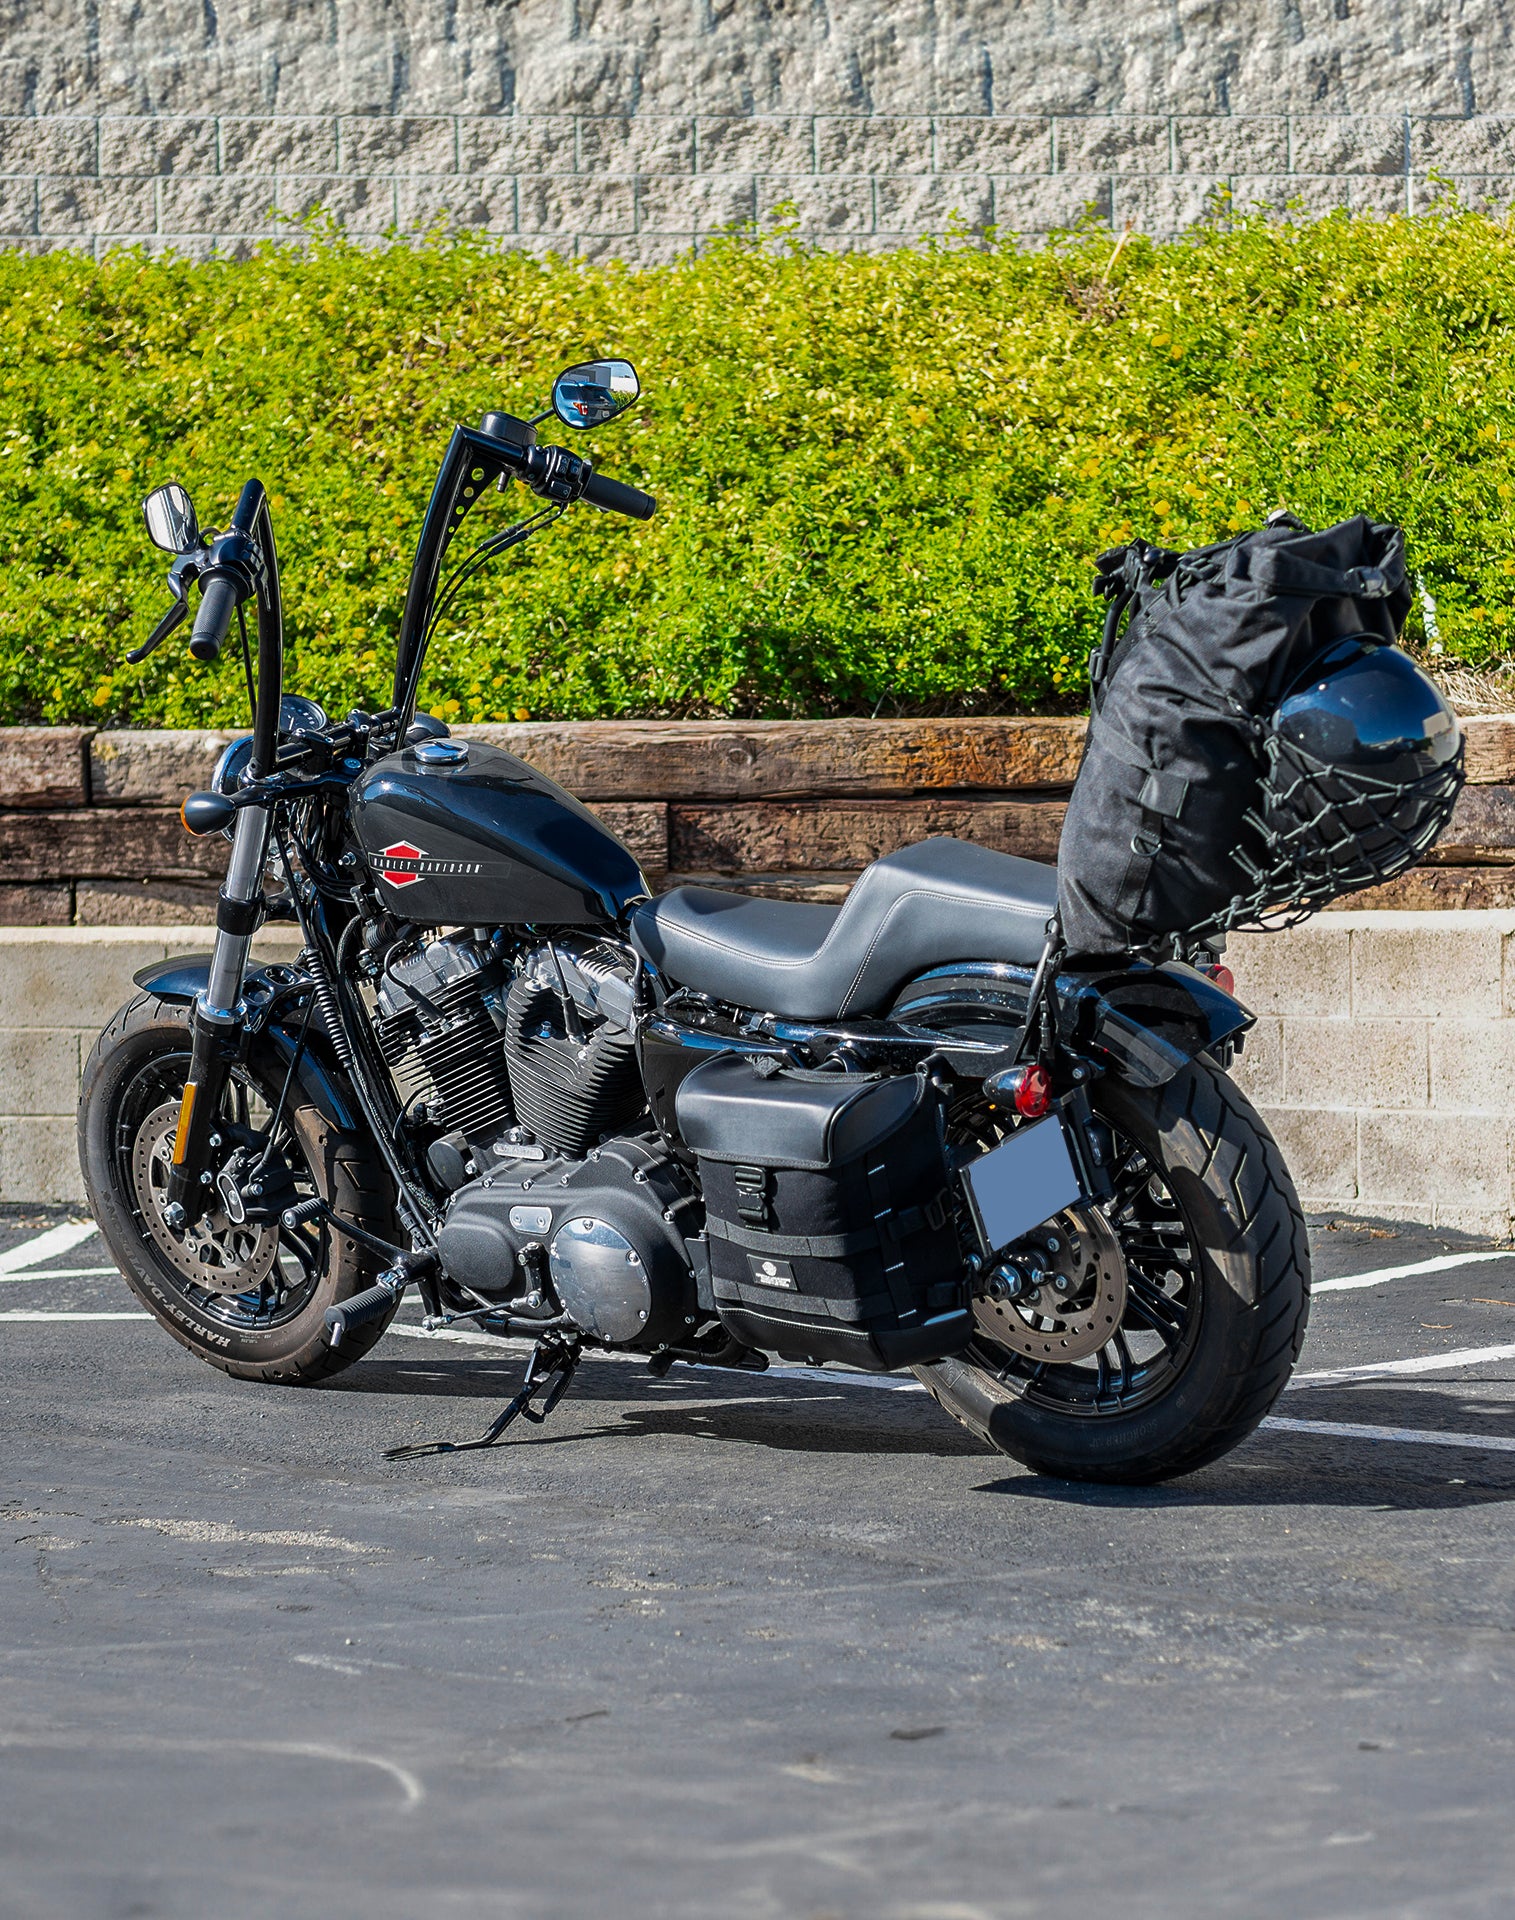 32L - Vanguard Large Dry Triumph Motorcycle Backpack